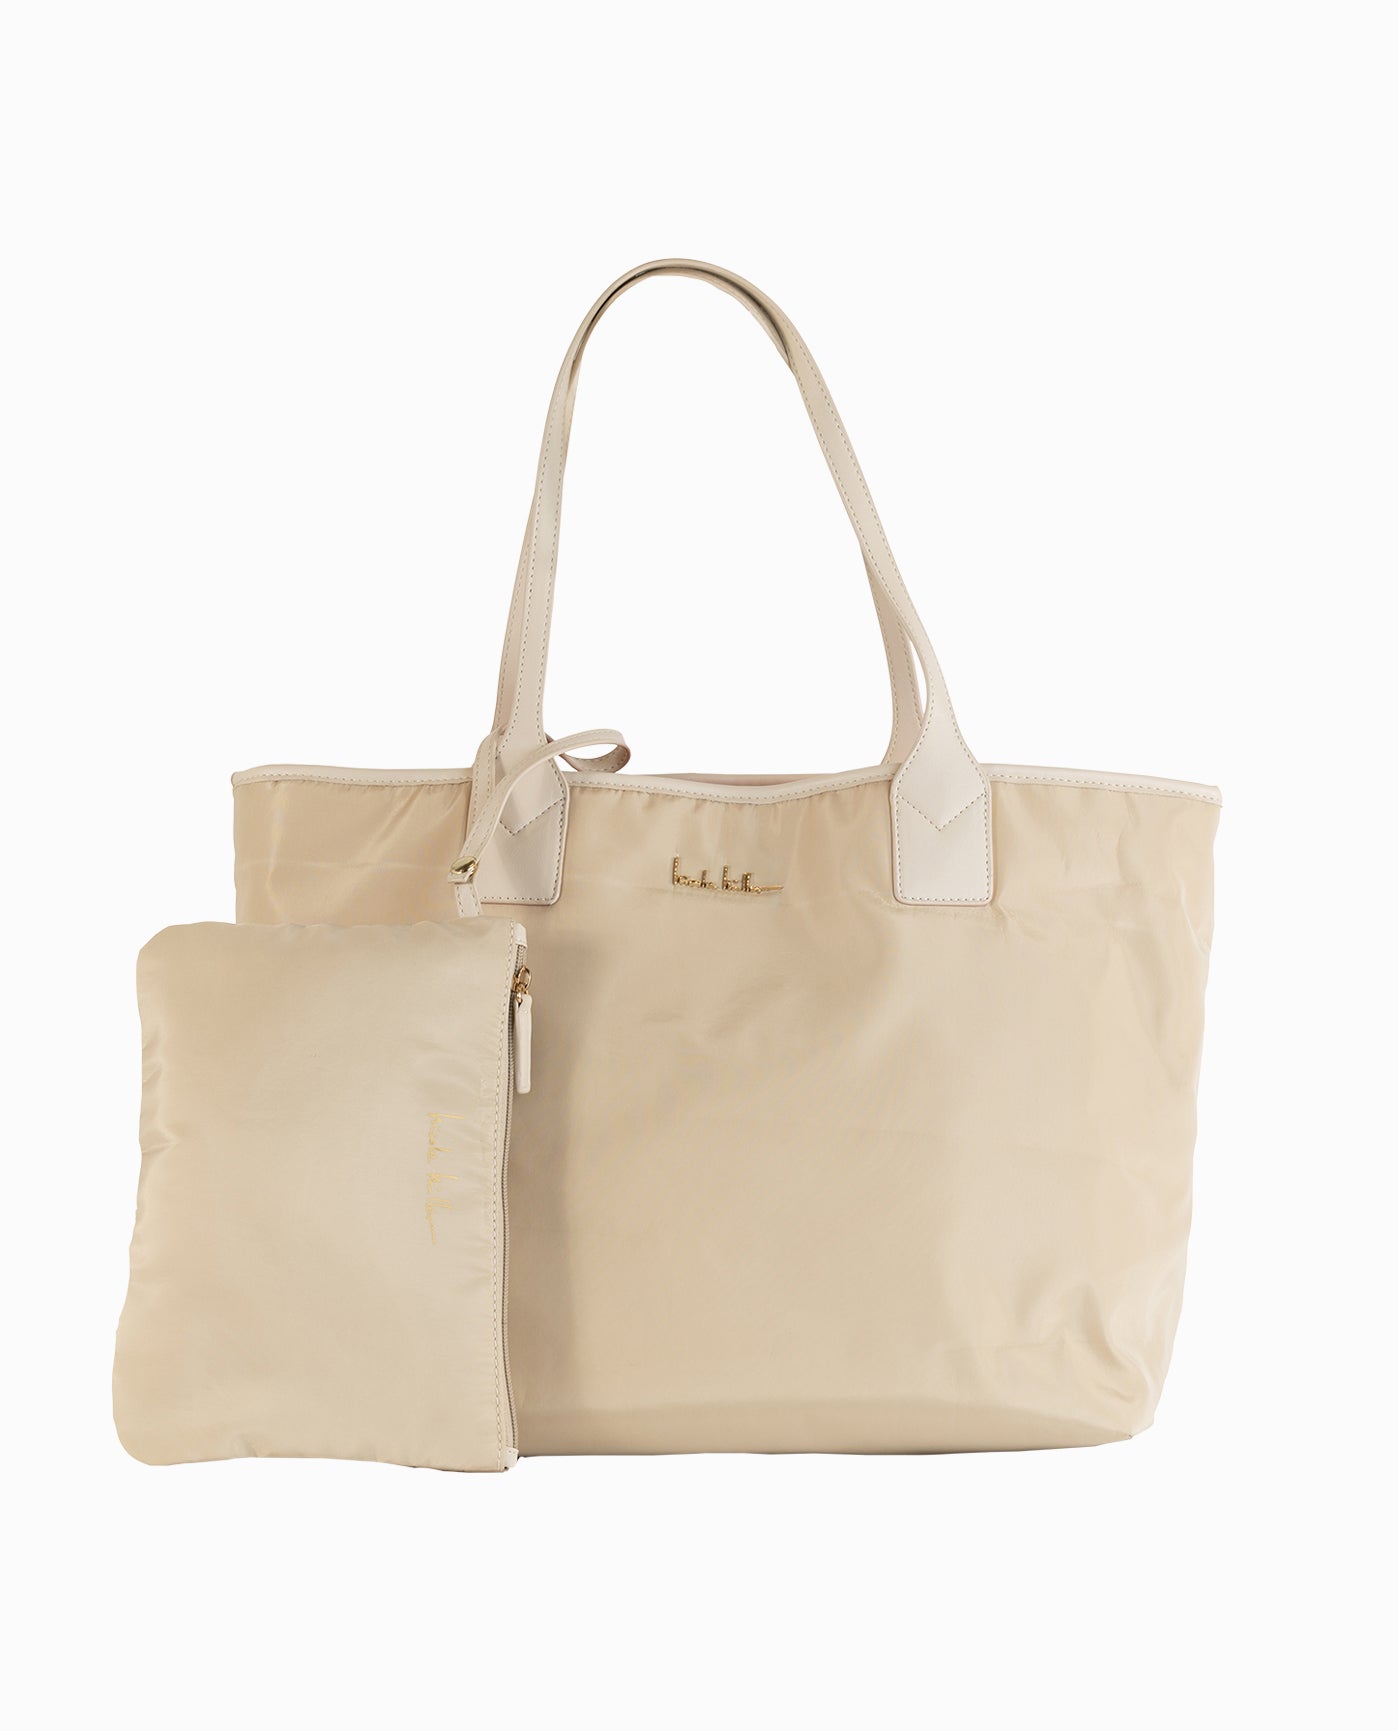 NYLON REVERSIBLE TOTE BAG | Summer Sand And Peach